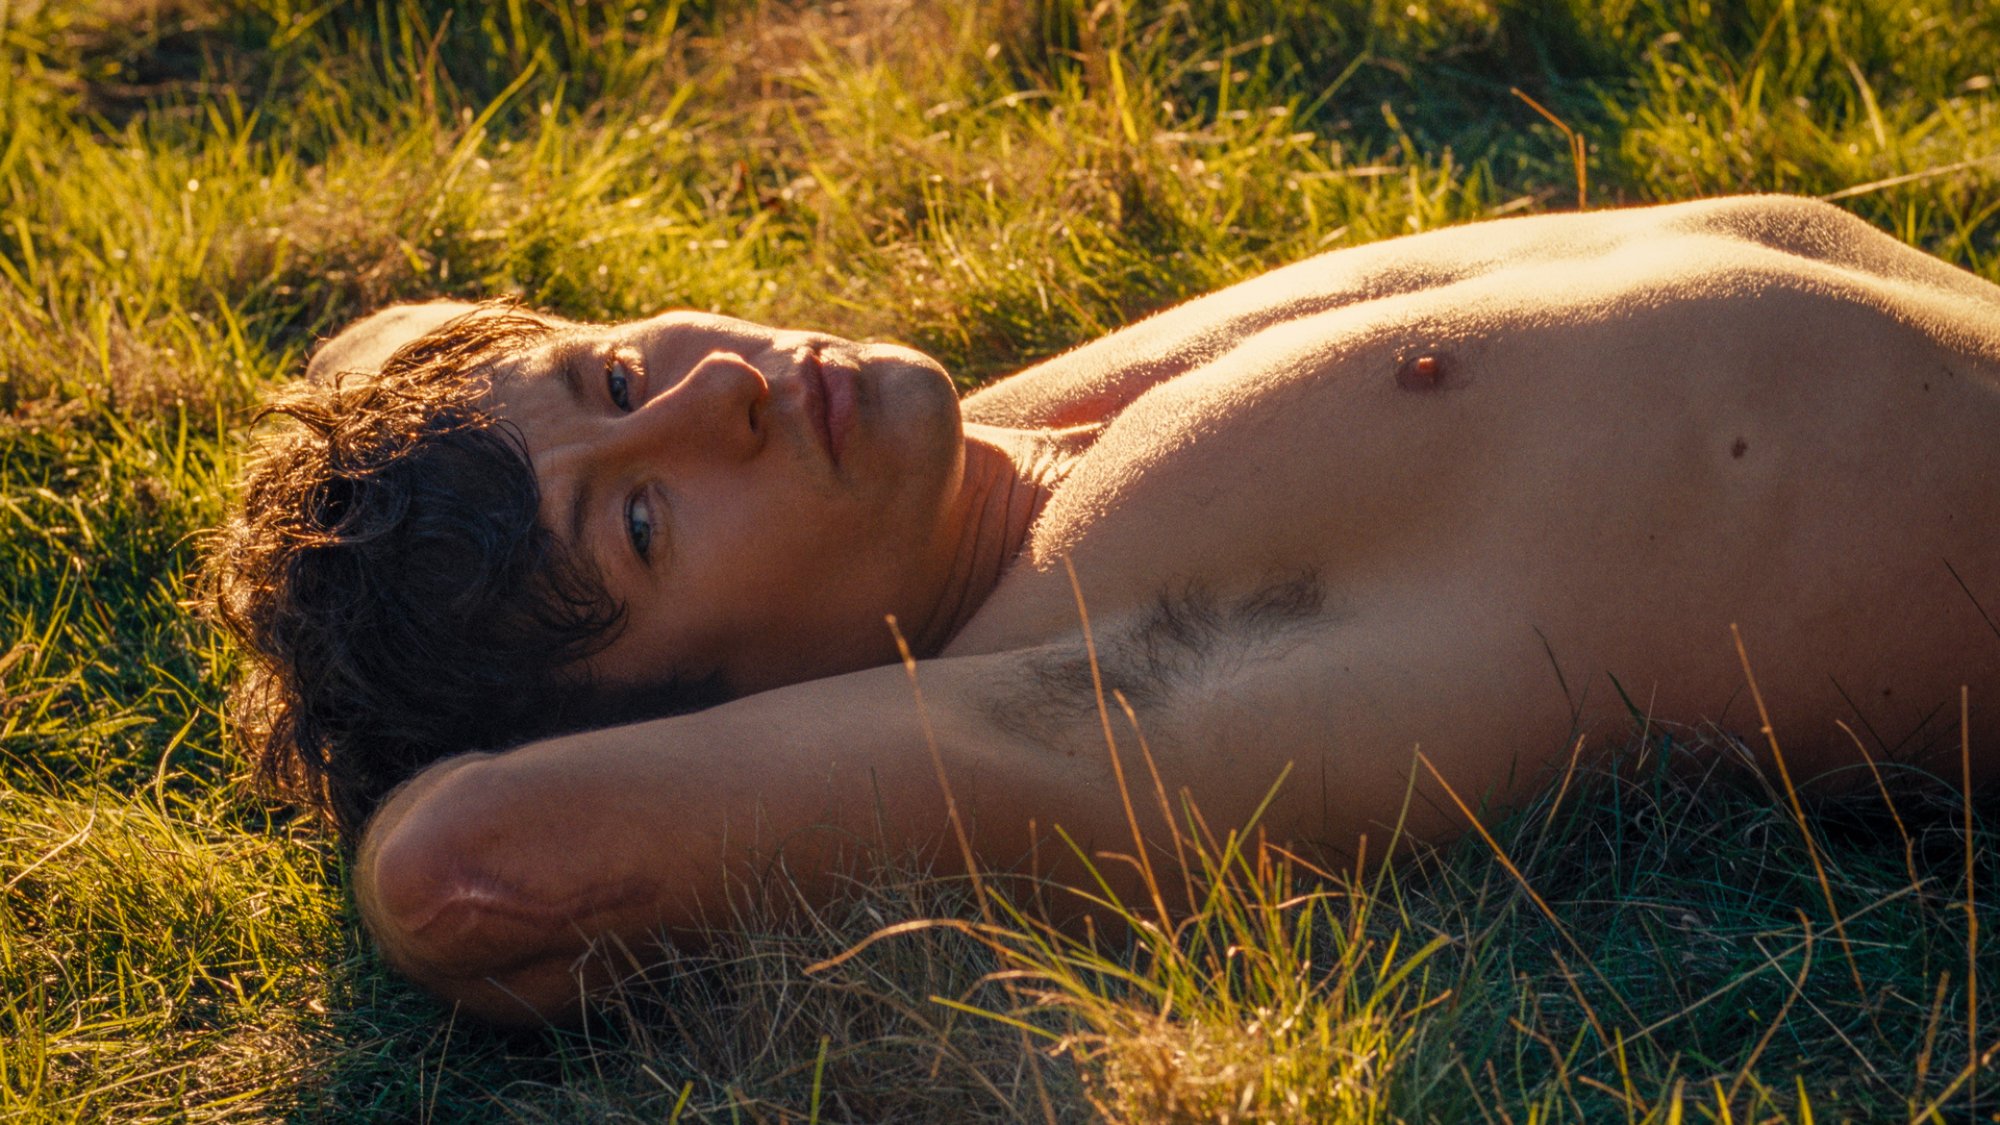 A young man lies on the grass without a shirt.